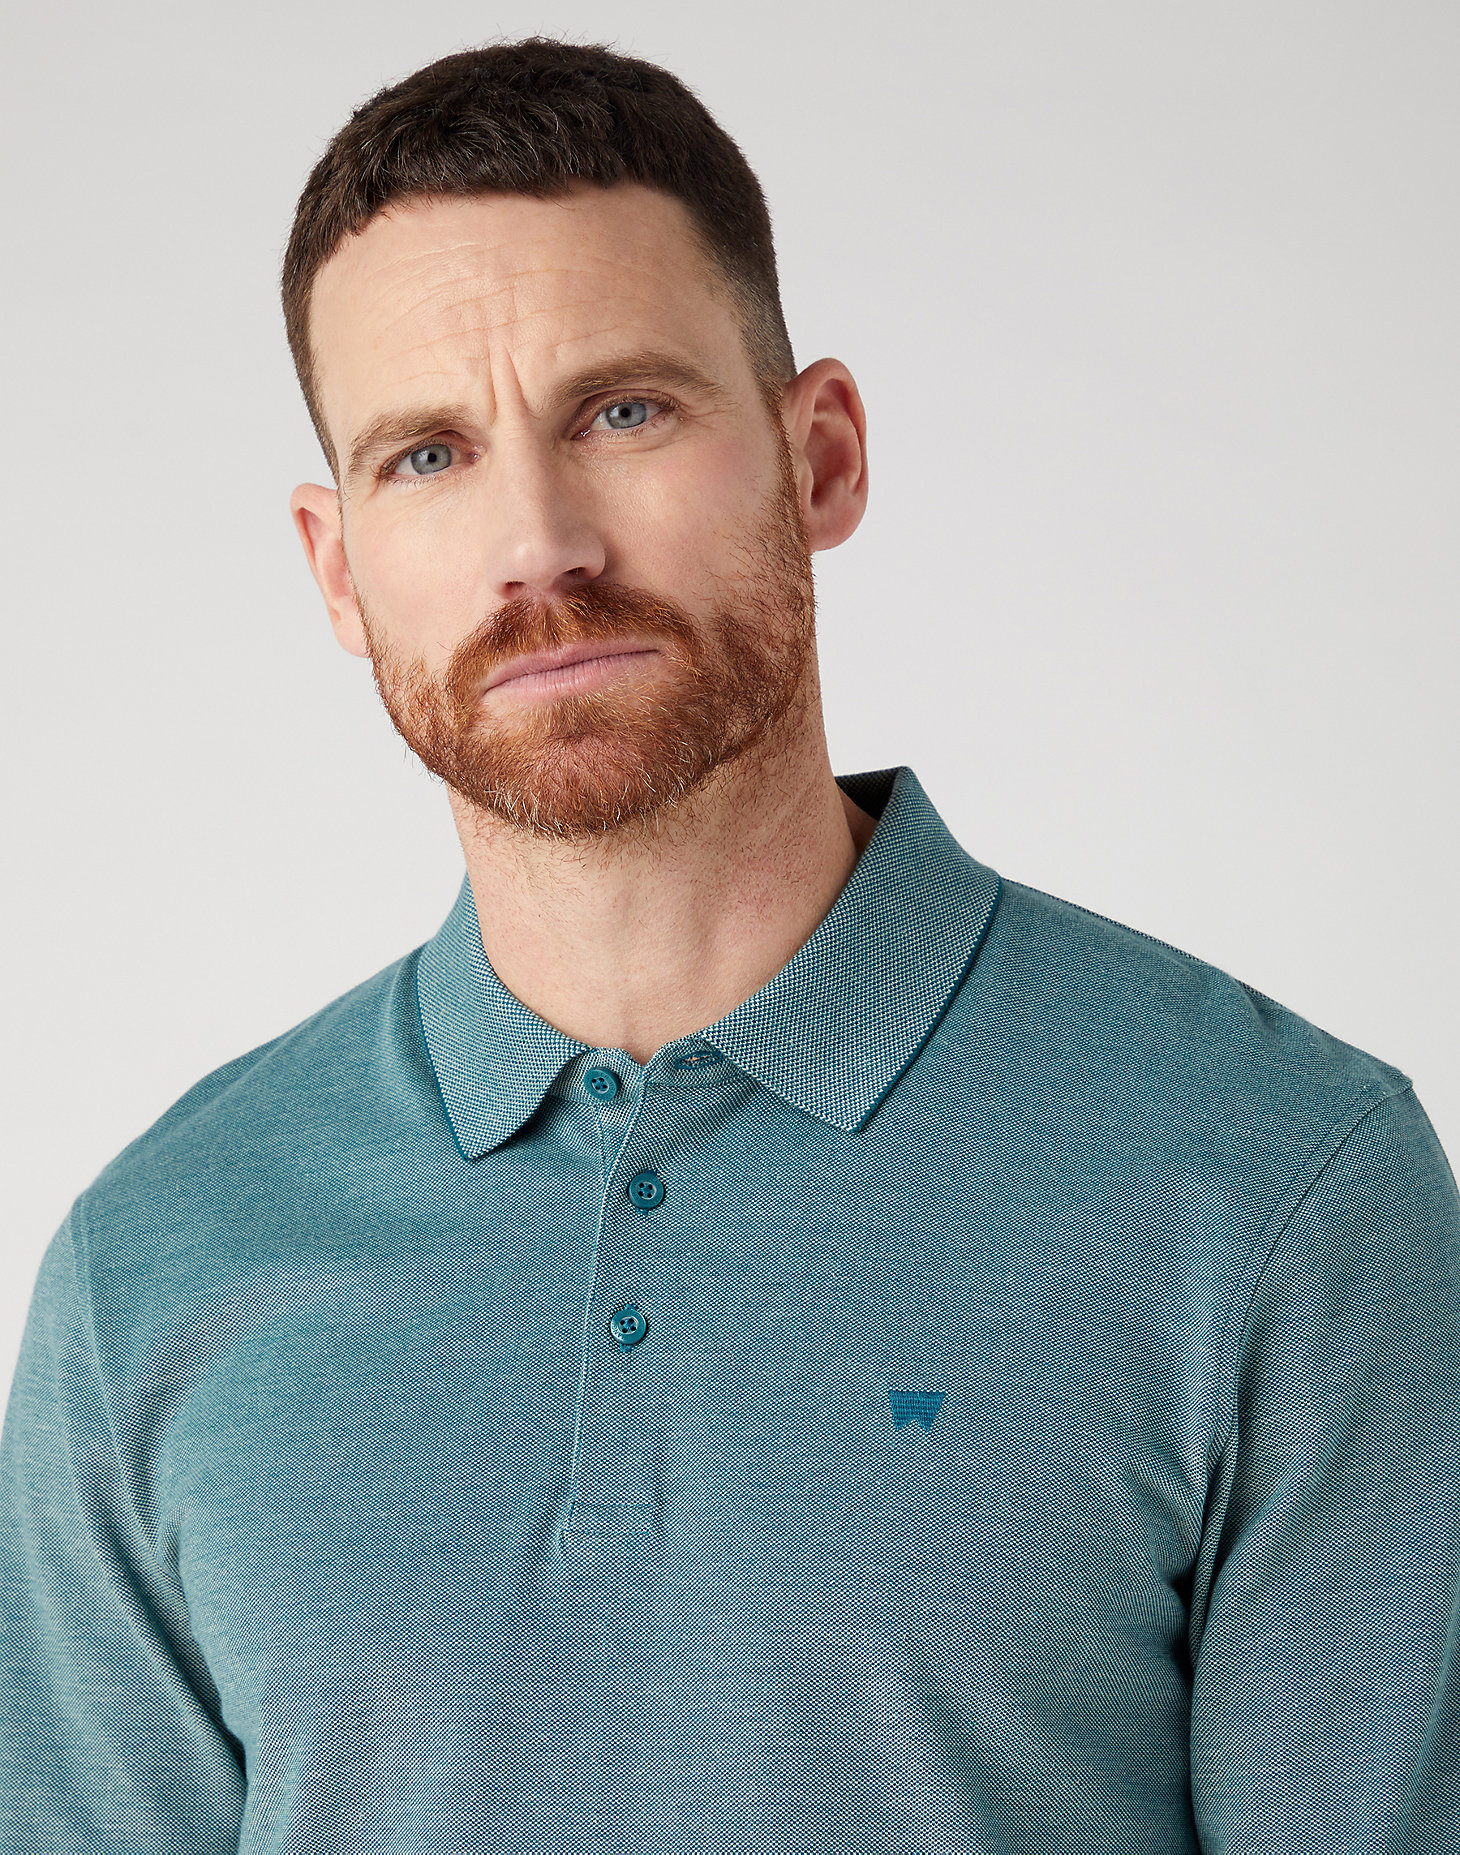 Long Sleeve Refined Polo in Deep Teal Green alternative view 3